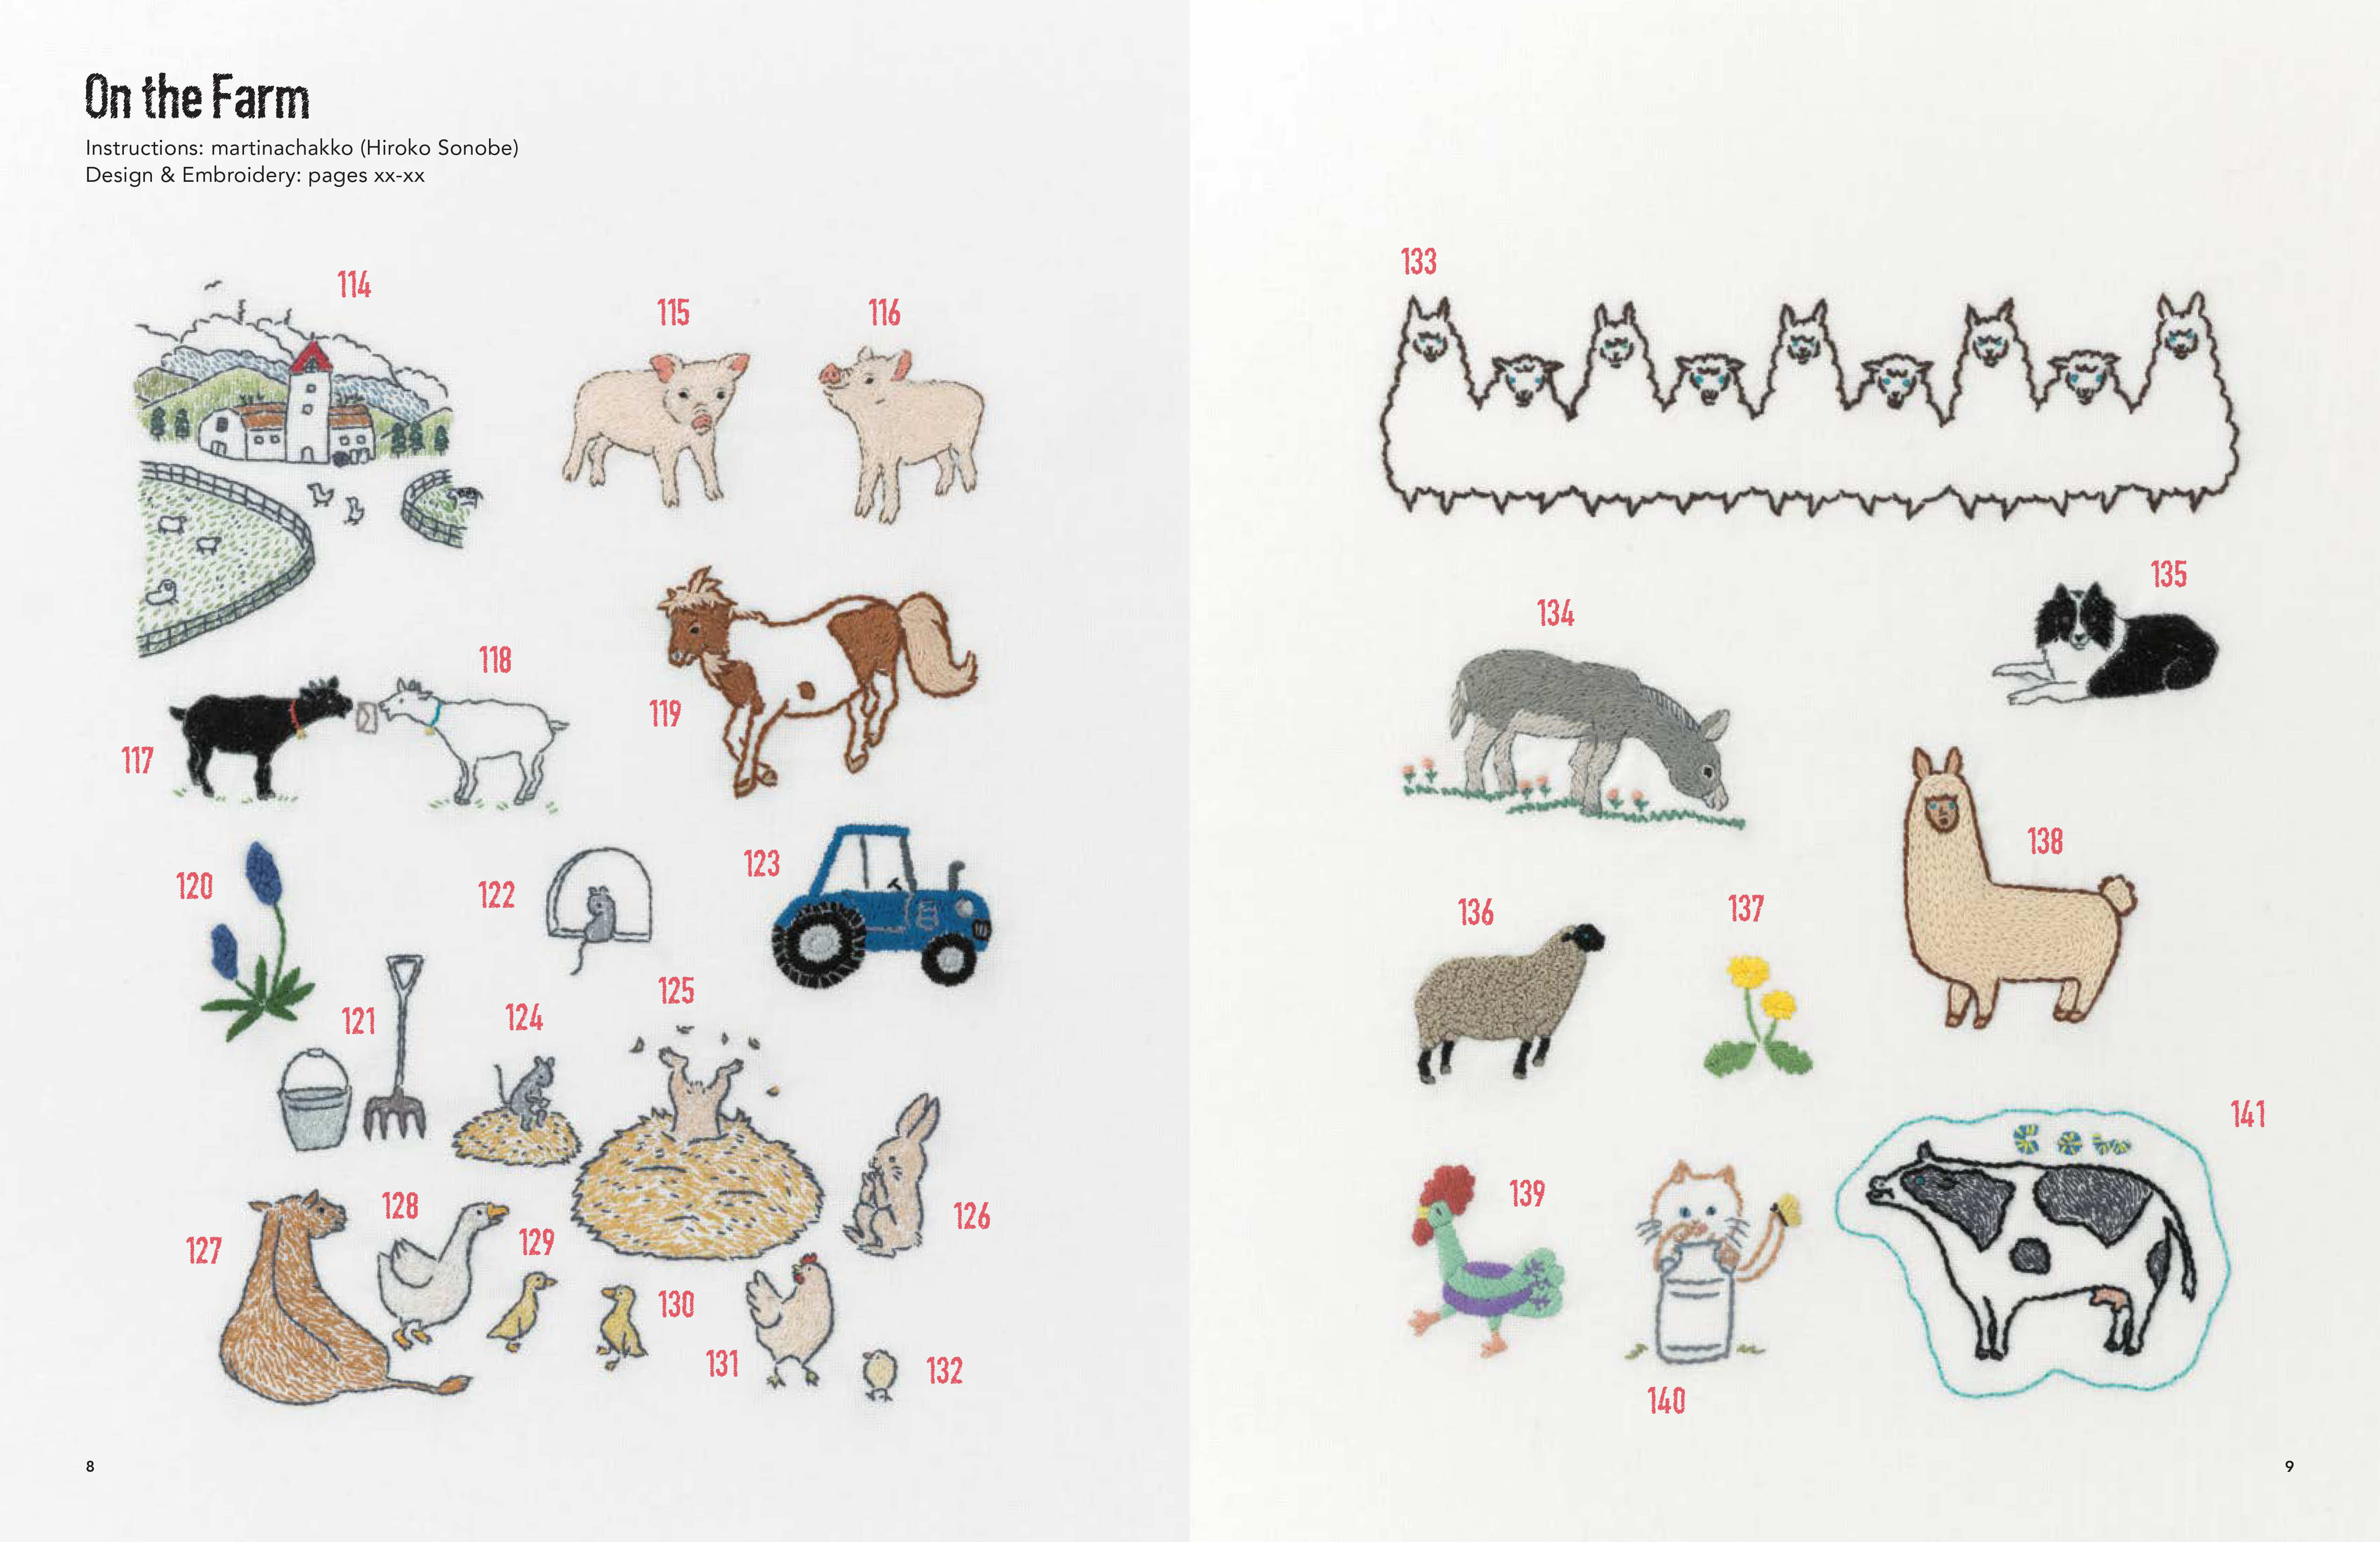 How to Embroider Almost Every Animal